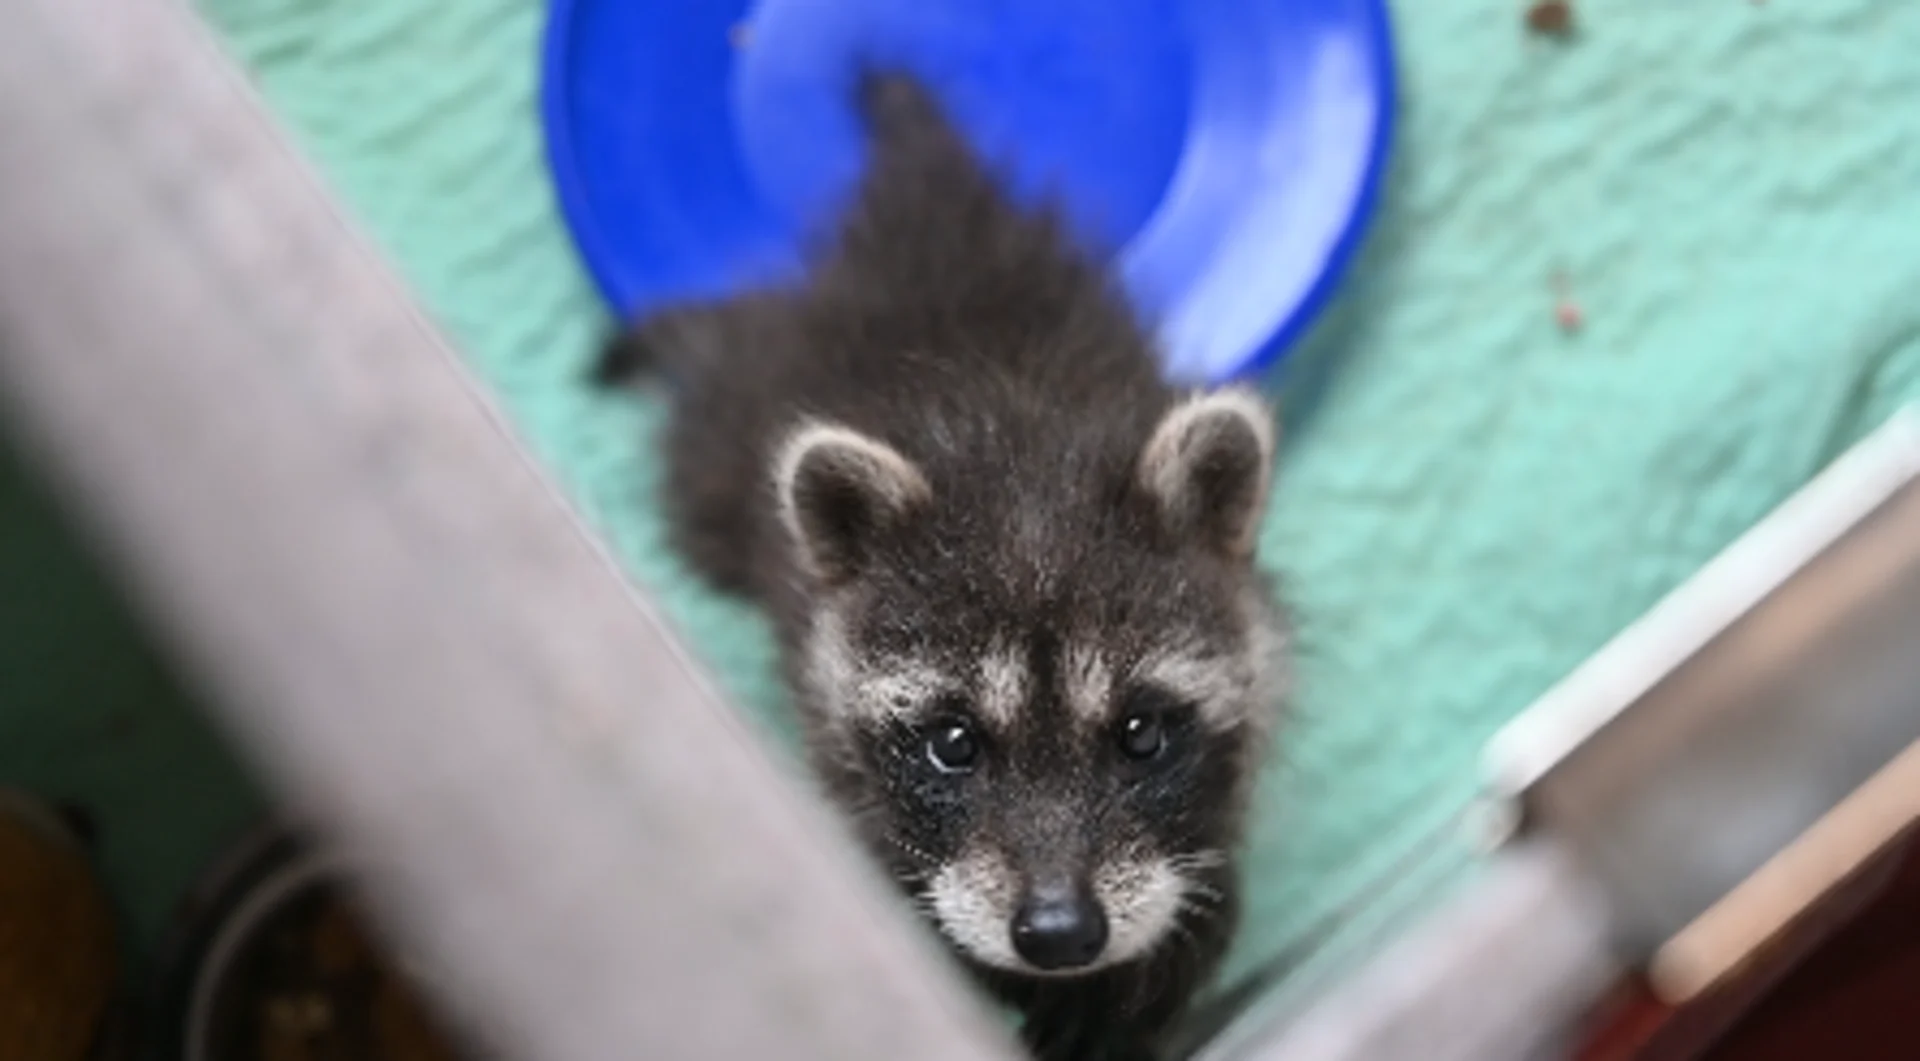 What to do if you find an orphaned animal